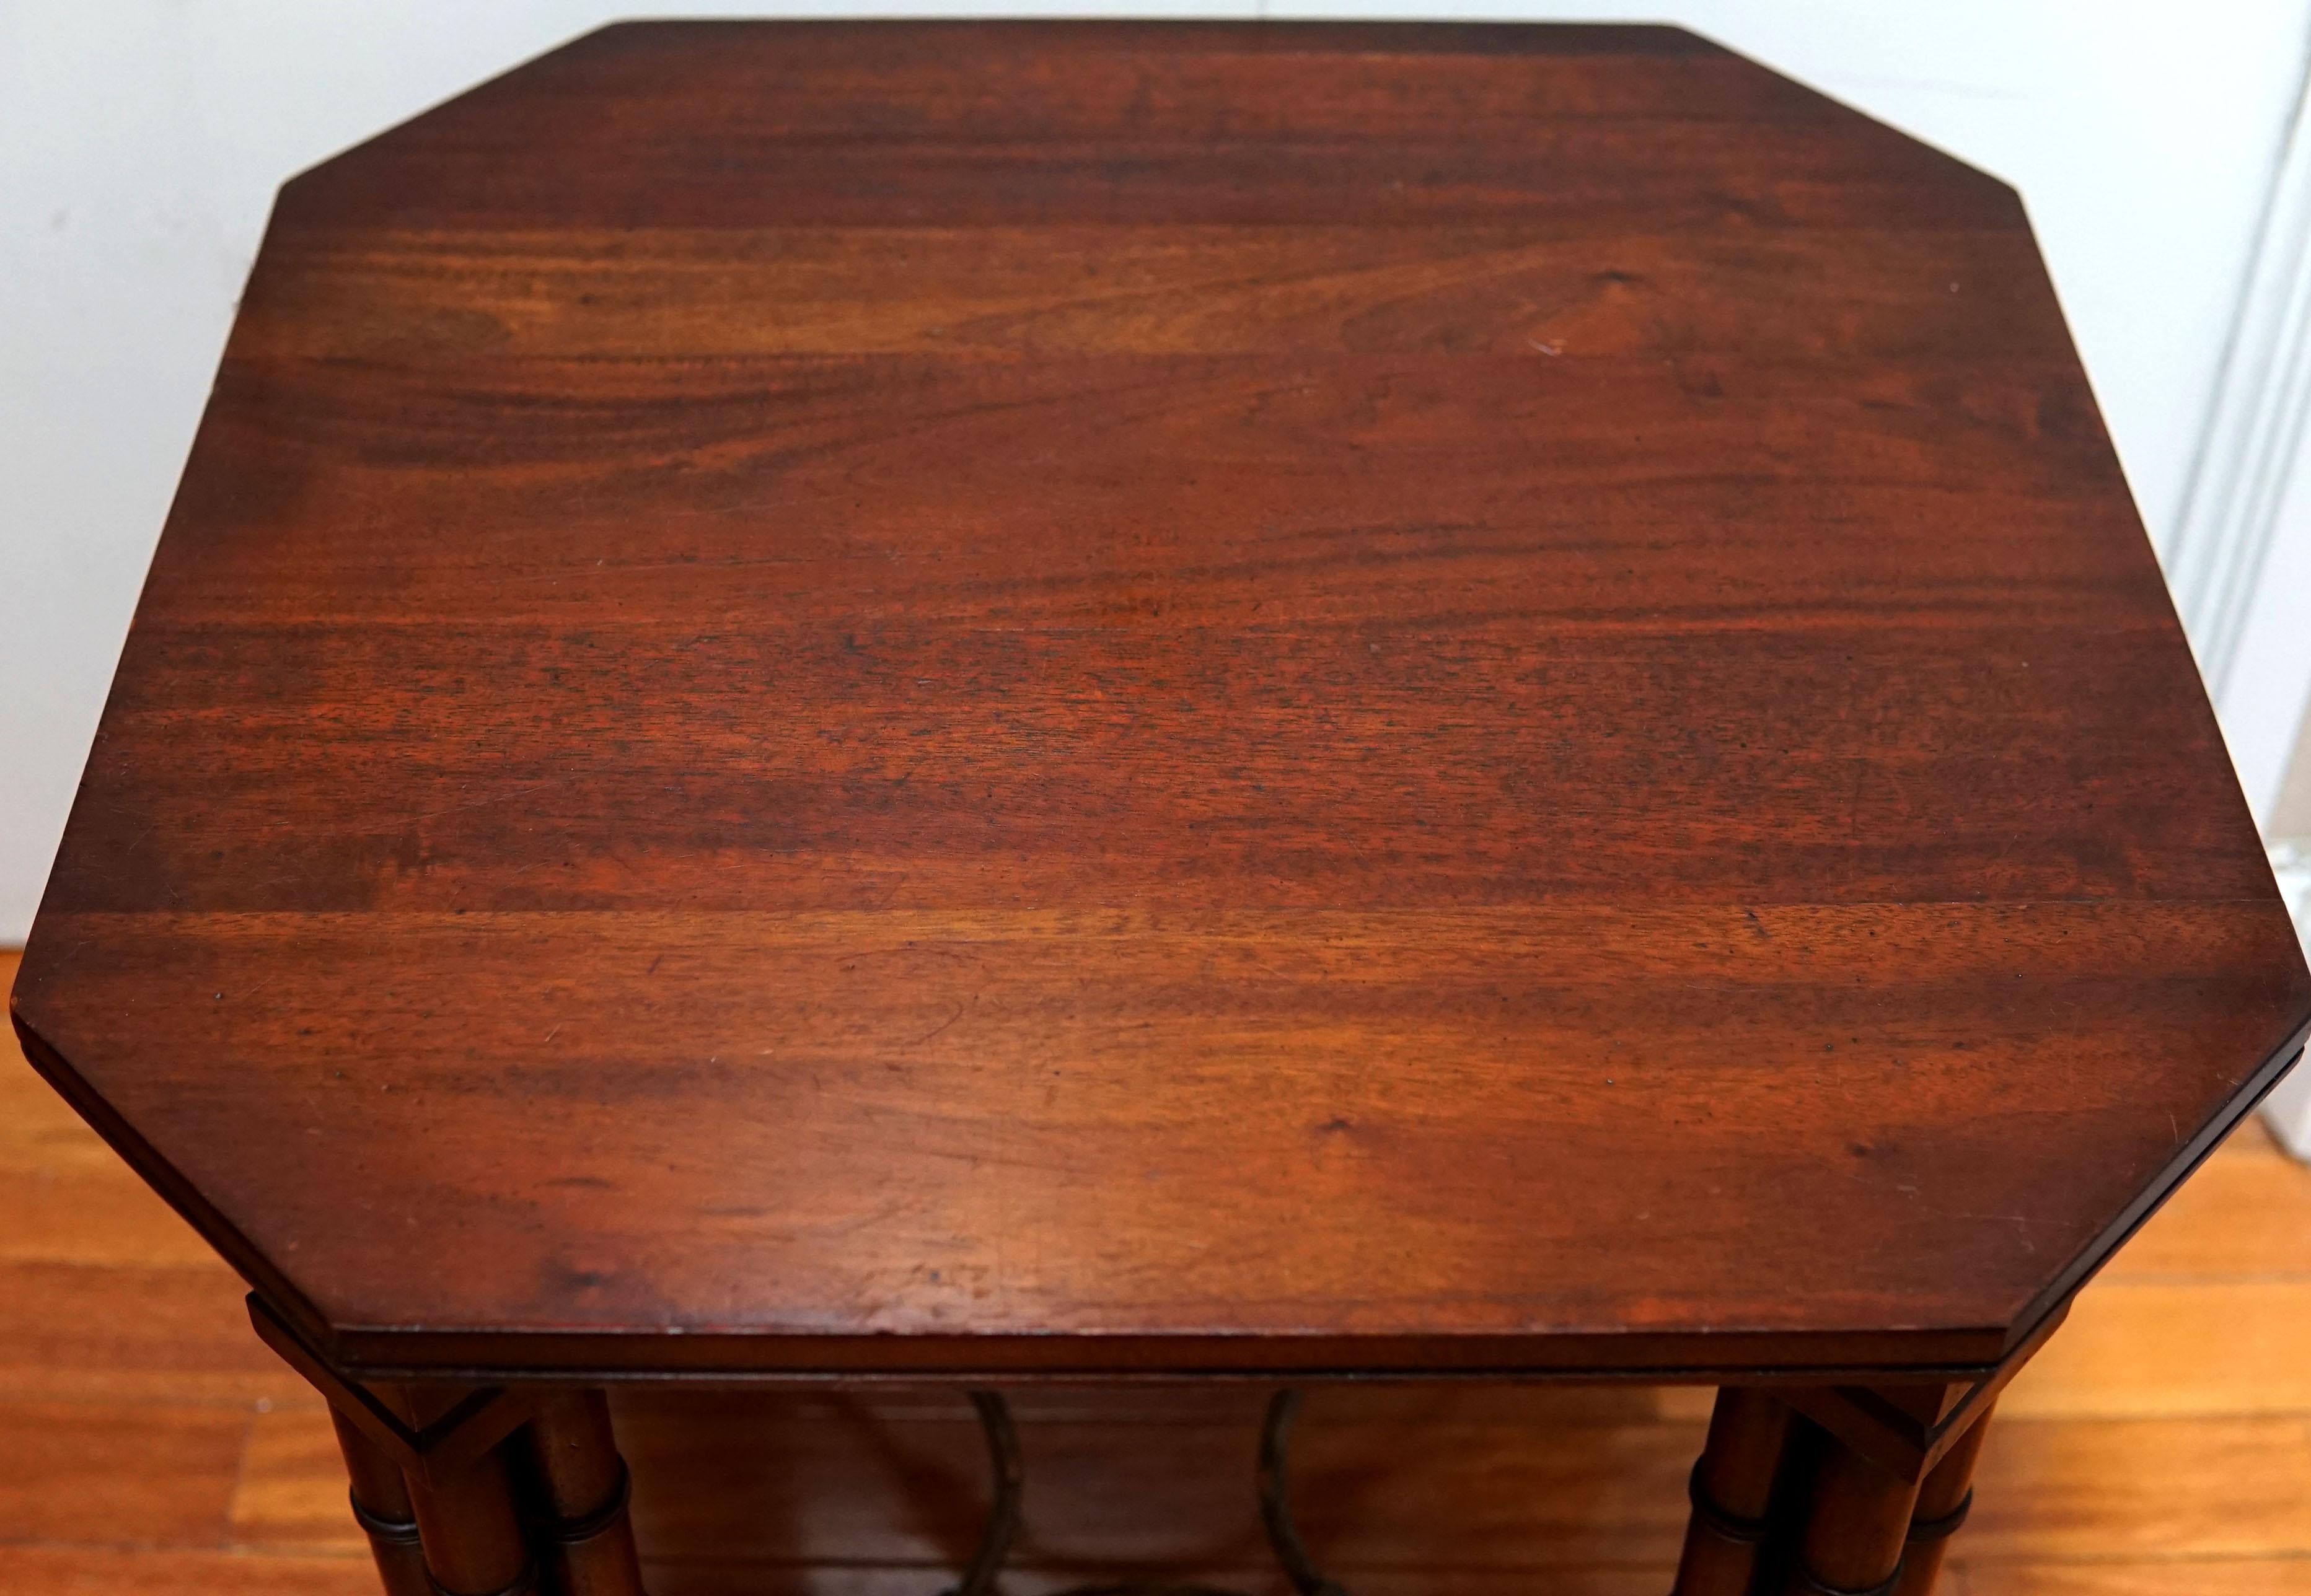 A rare mahogany occasional table from England circa the late 1800s has canted corners and acorn feet. This is a unique piece with distinctive handcrafting. The overall appearance is distinctive. The mahogany has a reddish tone with a deep patina.